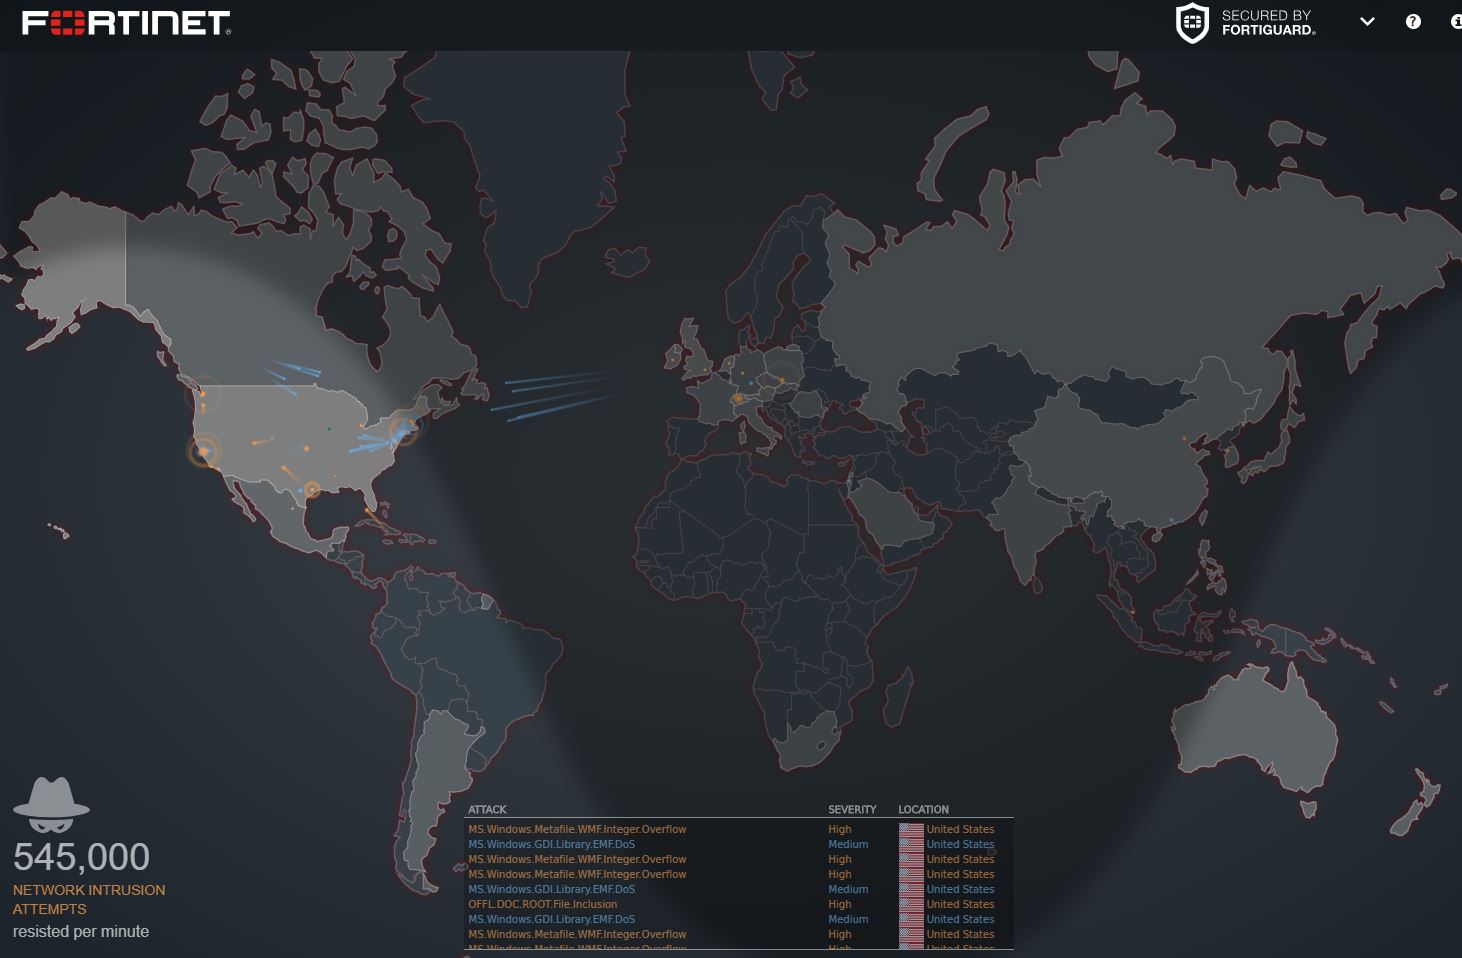 fortinet cyber map